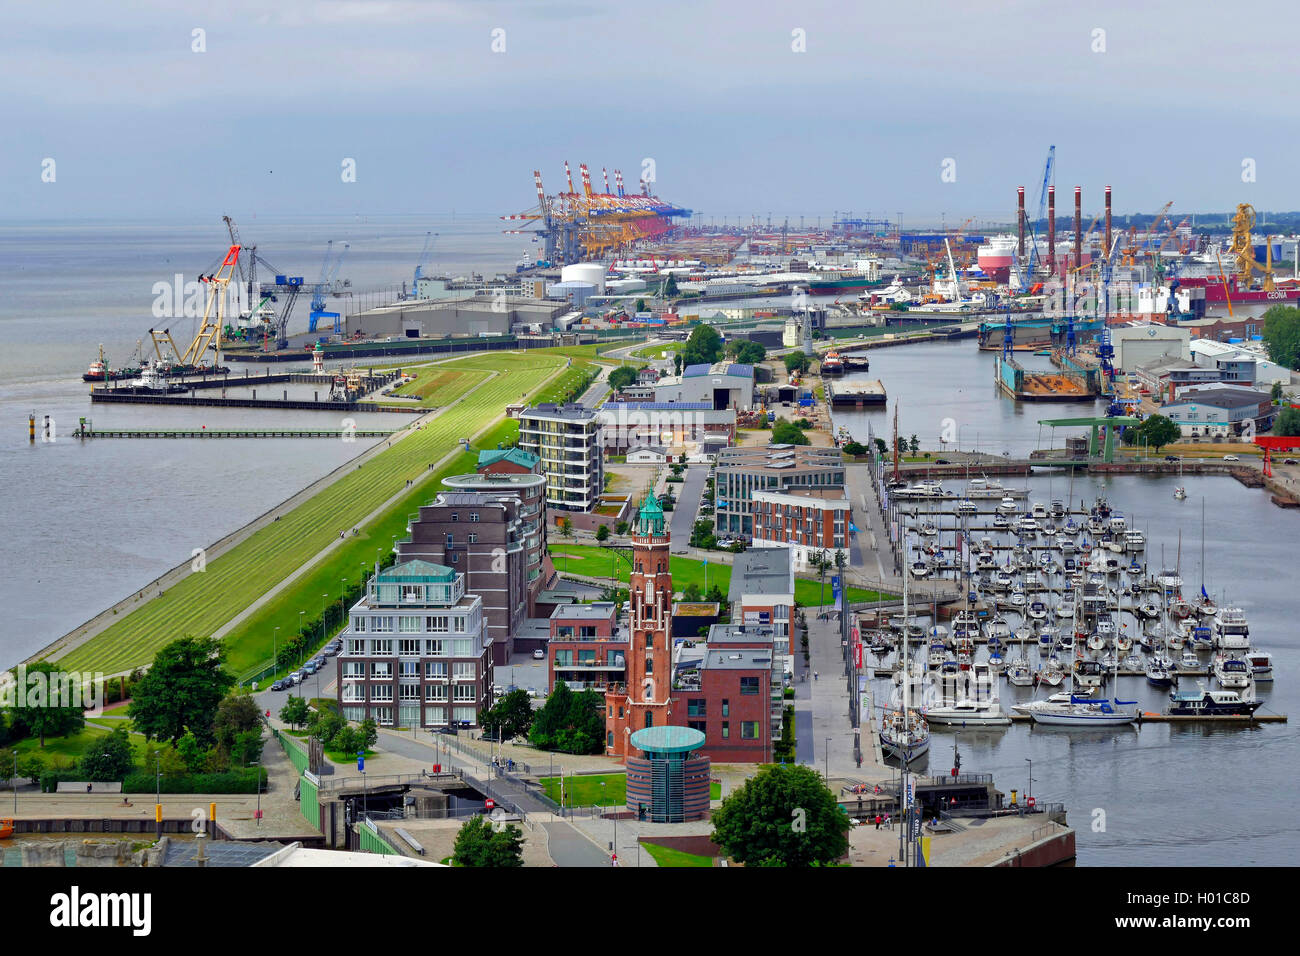 new harbor of Bremerhafen with lighthouse and container terminal in the background, Germany, Bremerhaven Stock Photo